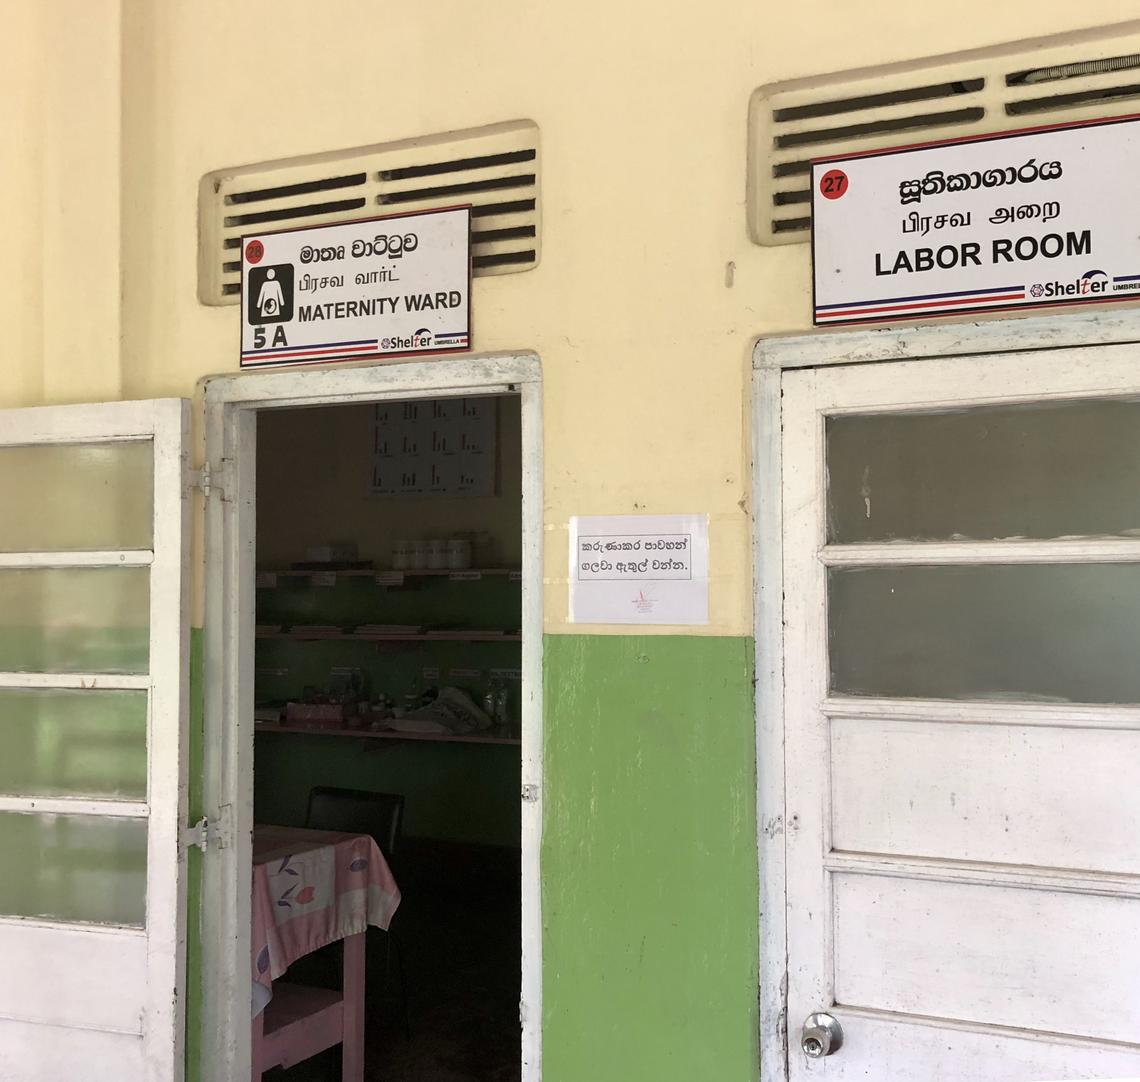 While visiting family in Sri Lanka, Hollis toured a number of rural health facilities including street clinics and maternity wards. Photos courtesy Asha Hollis